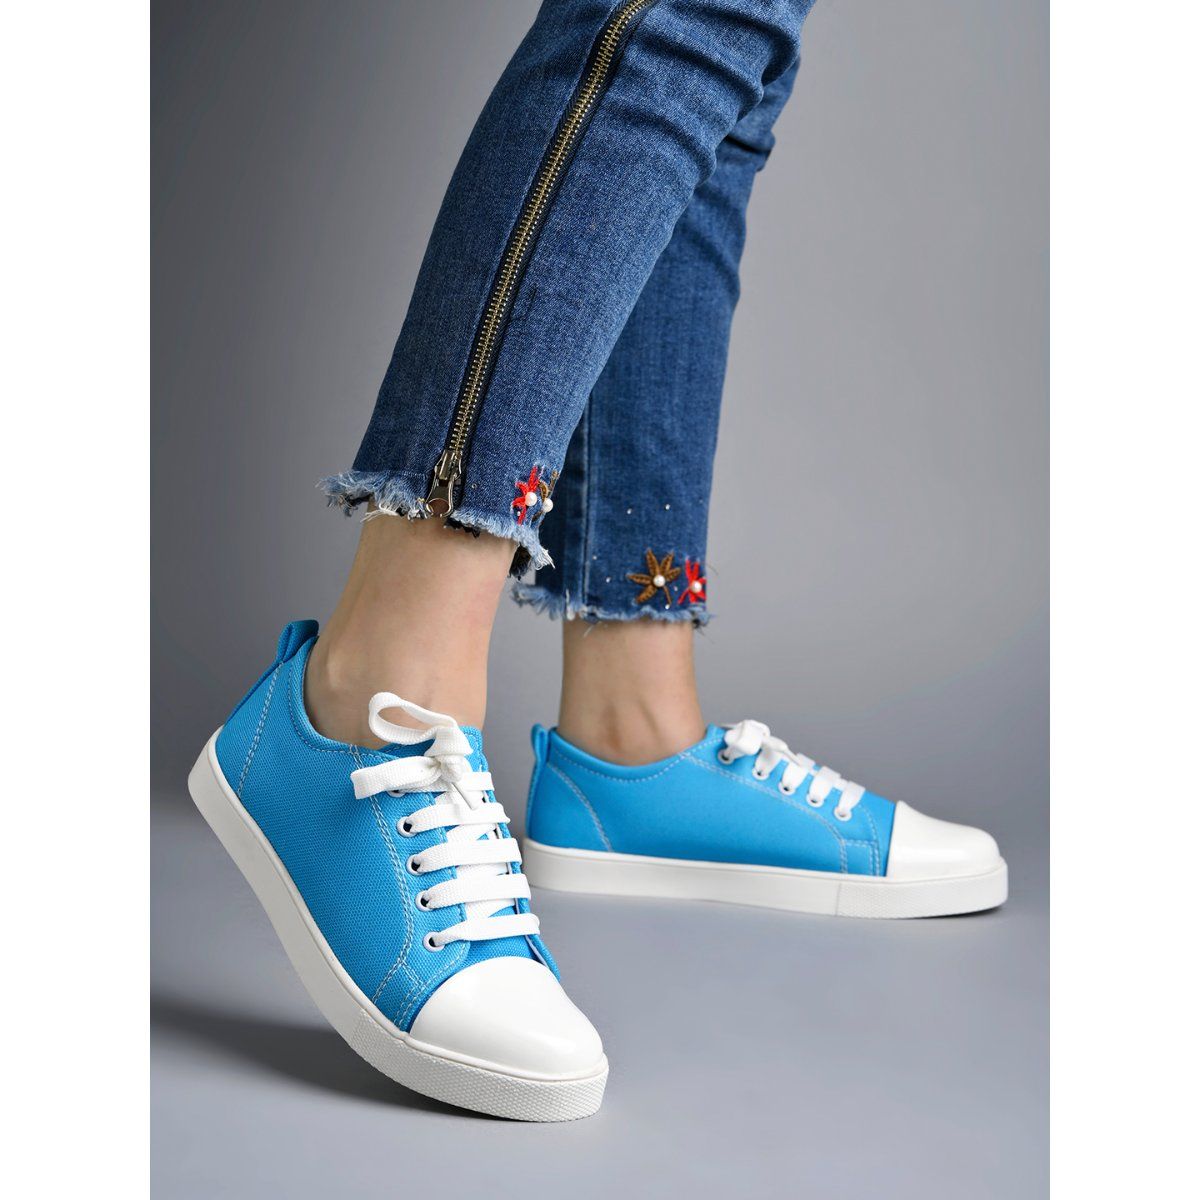 Buy Gola womens Daytona sneakers in shadow/blossom/blue online at gola